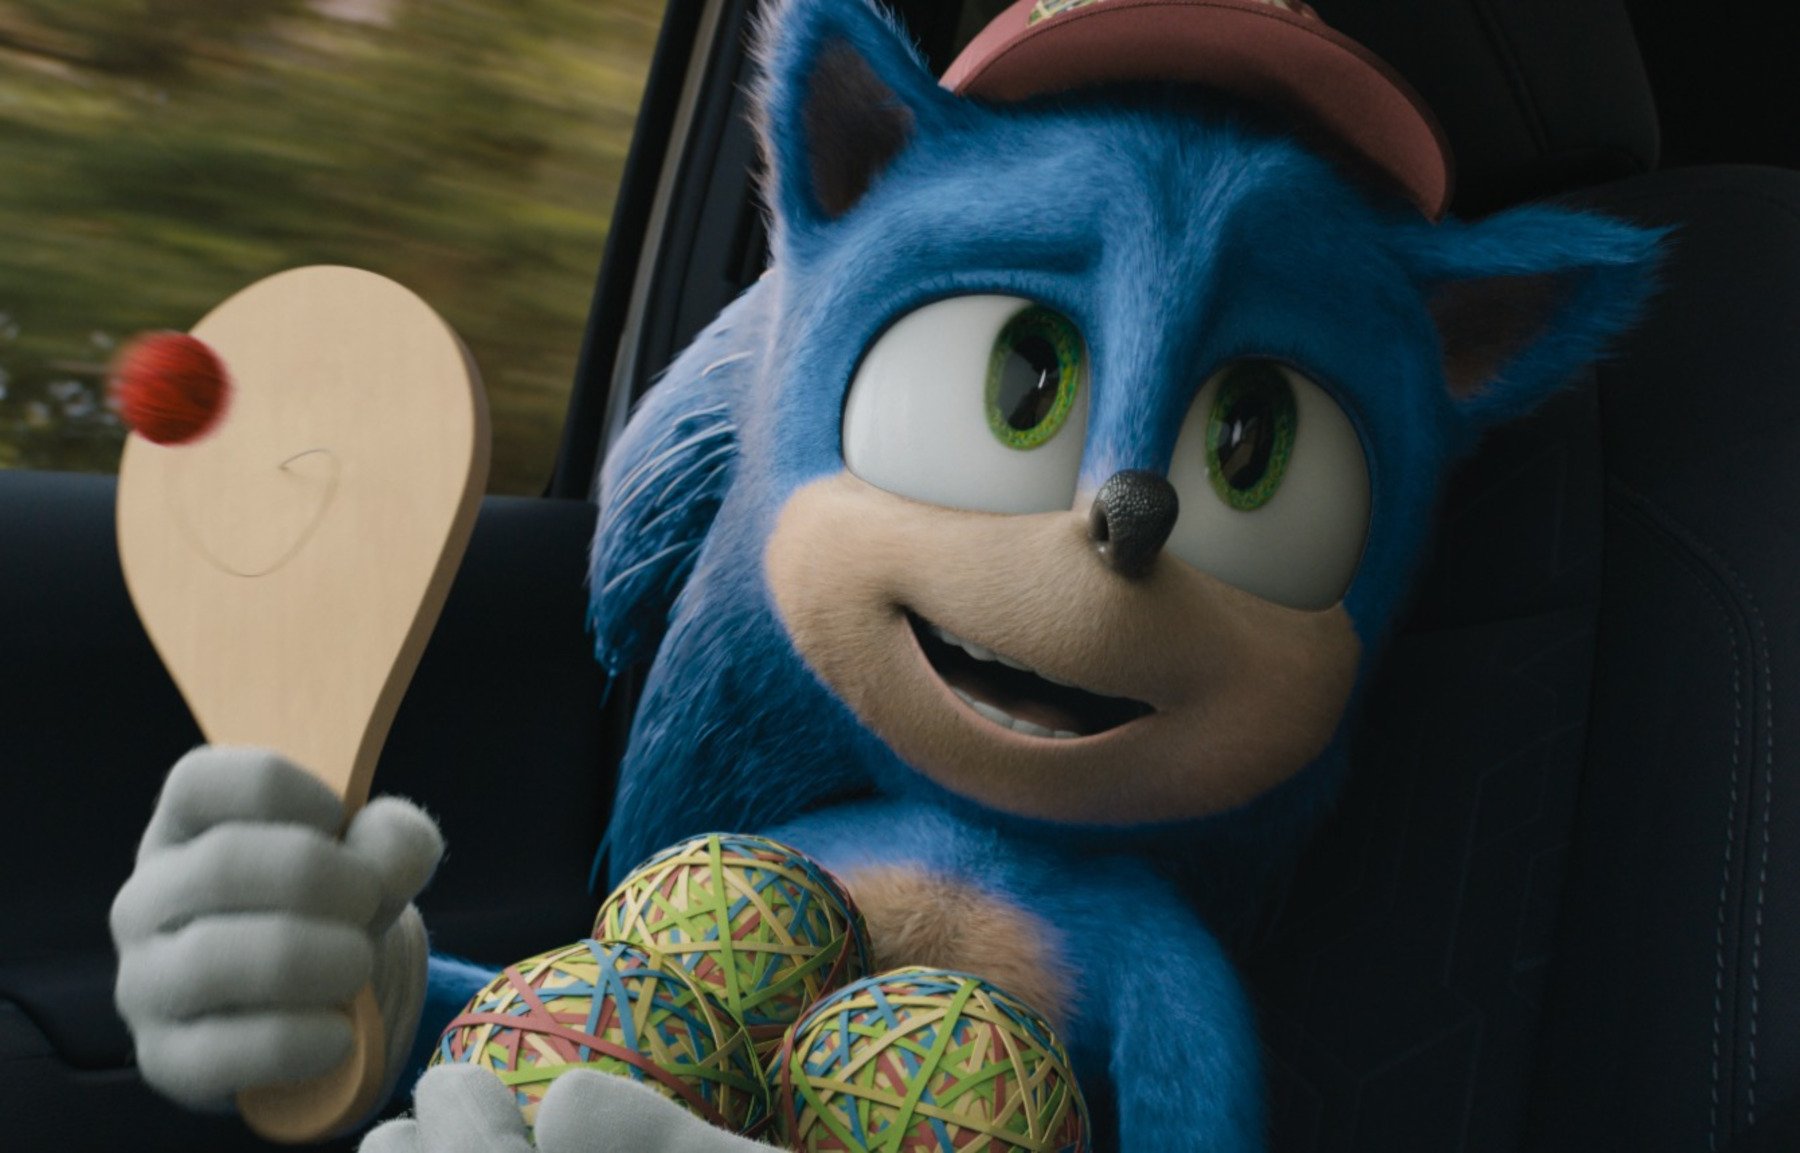 Sonic the Hedgehog (2020) Stream and Watch Online